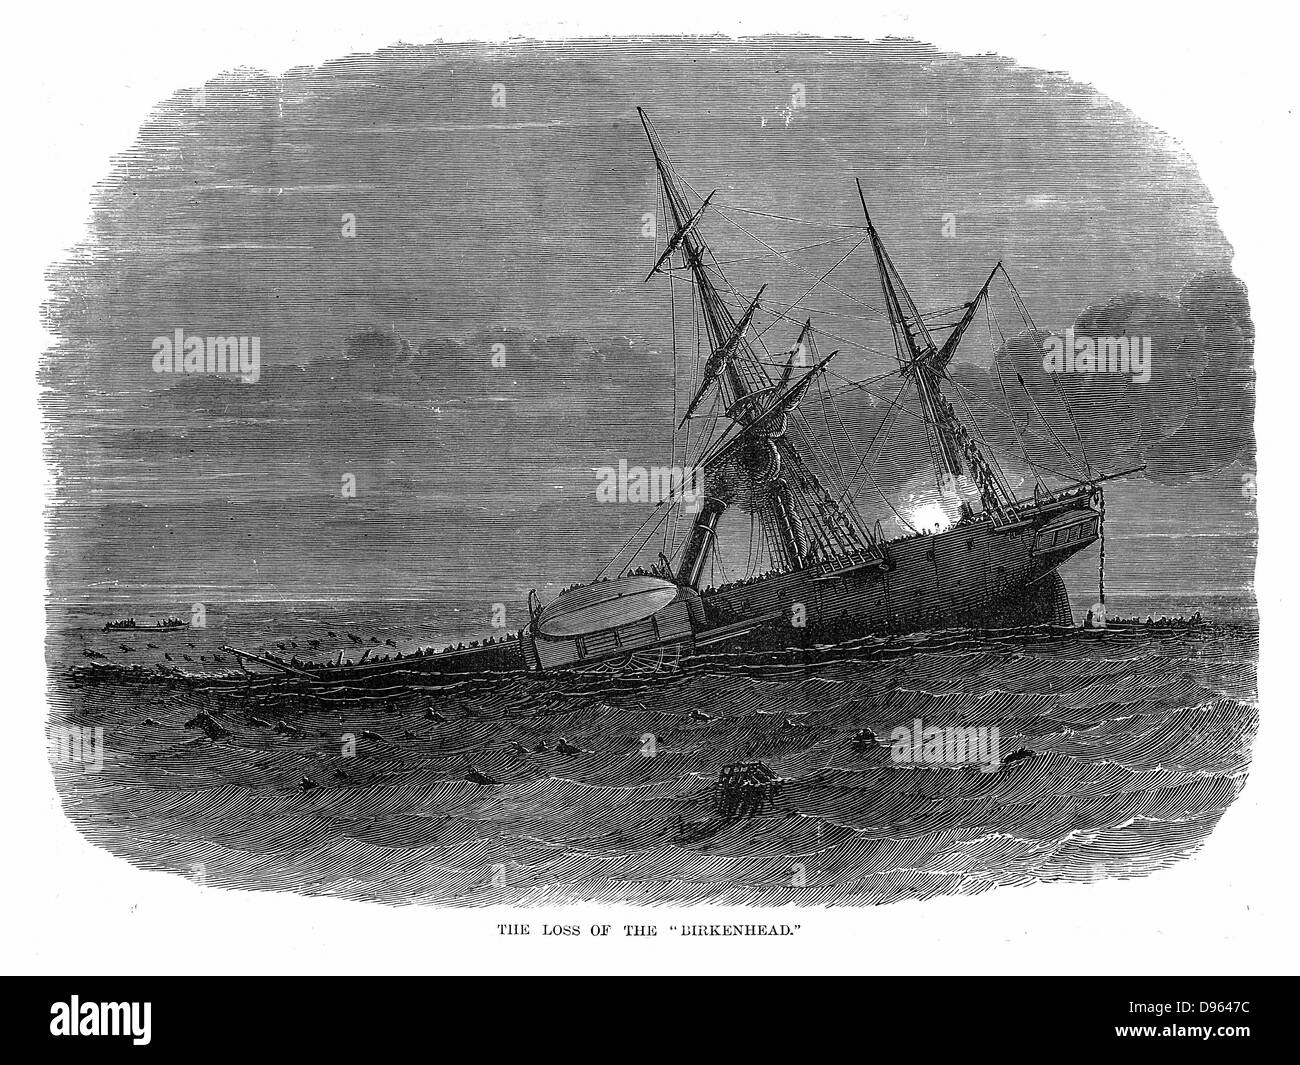 Loss of iron paddle-steamer troop ship 'Birkenhead' off Simon's Bay South Africa 26 February 1852.  Commanding officer, Colonel Seton, gave the order Women and children first.  Men stood on deck awaiting their fate. Of 638 on board 184 were saved by the boats. The vessel going down. Wood engraving. Stock Photo